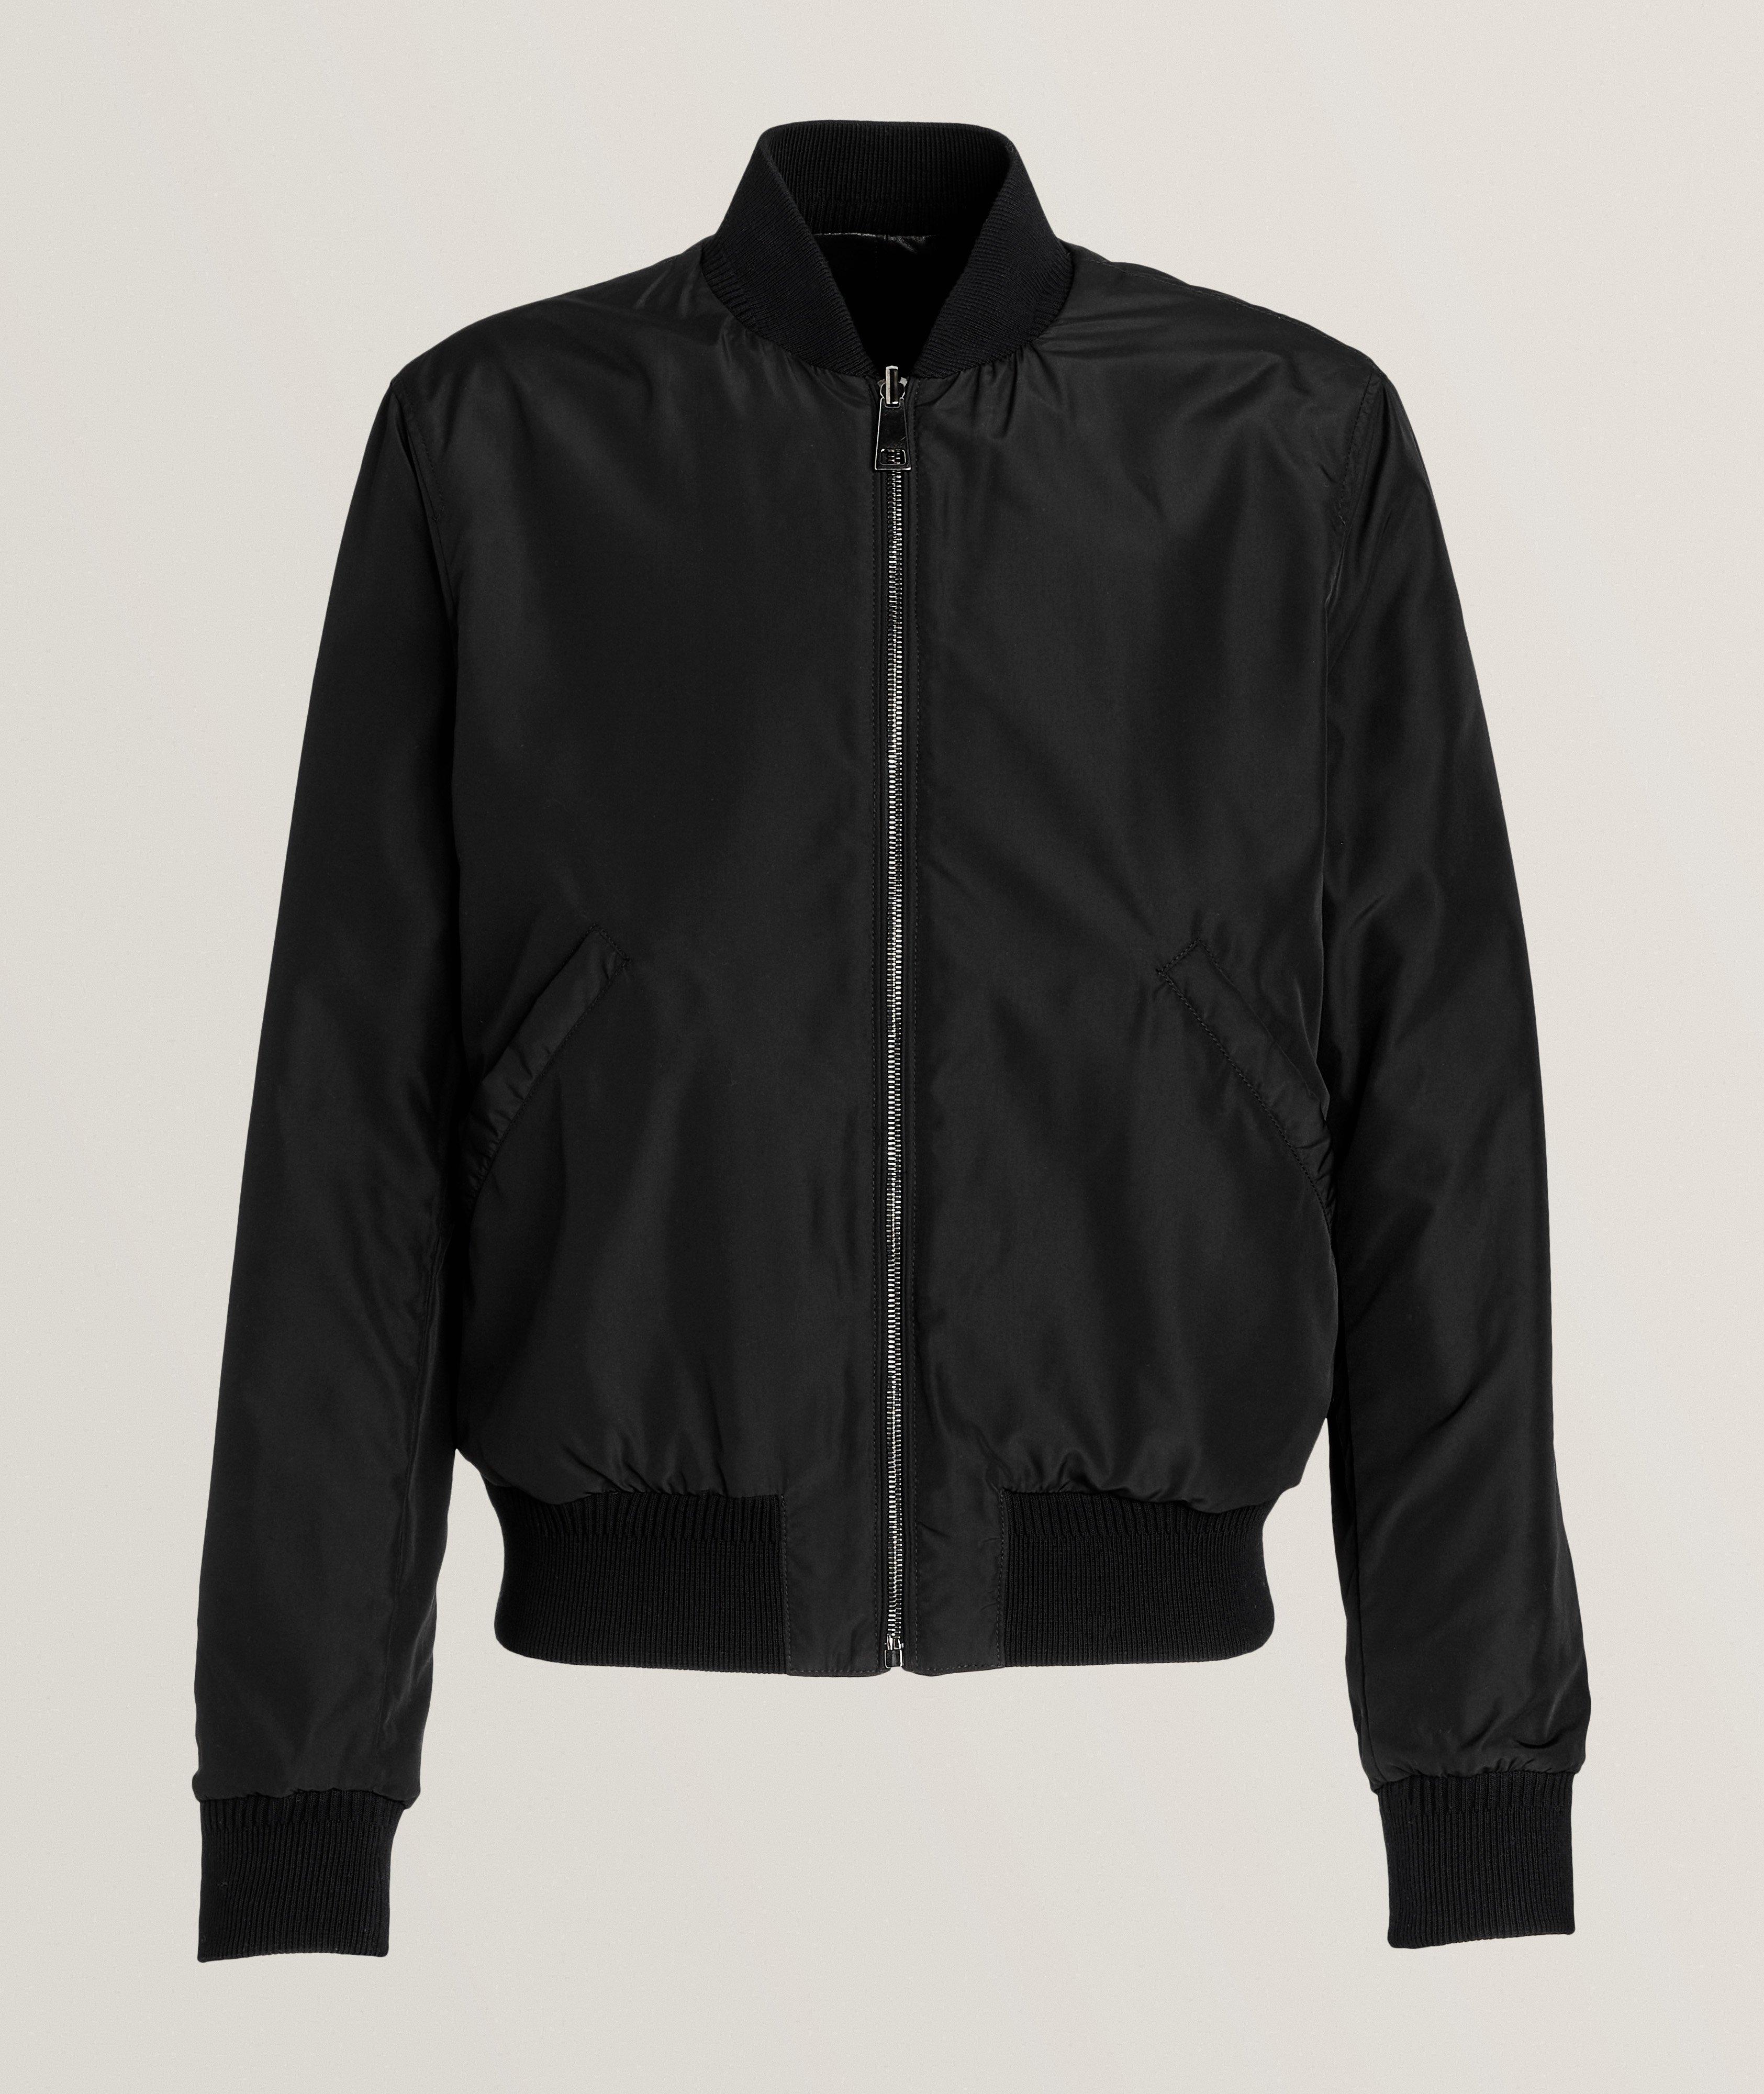 Reversible Leather Bomber image 1